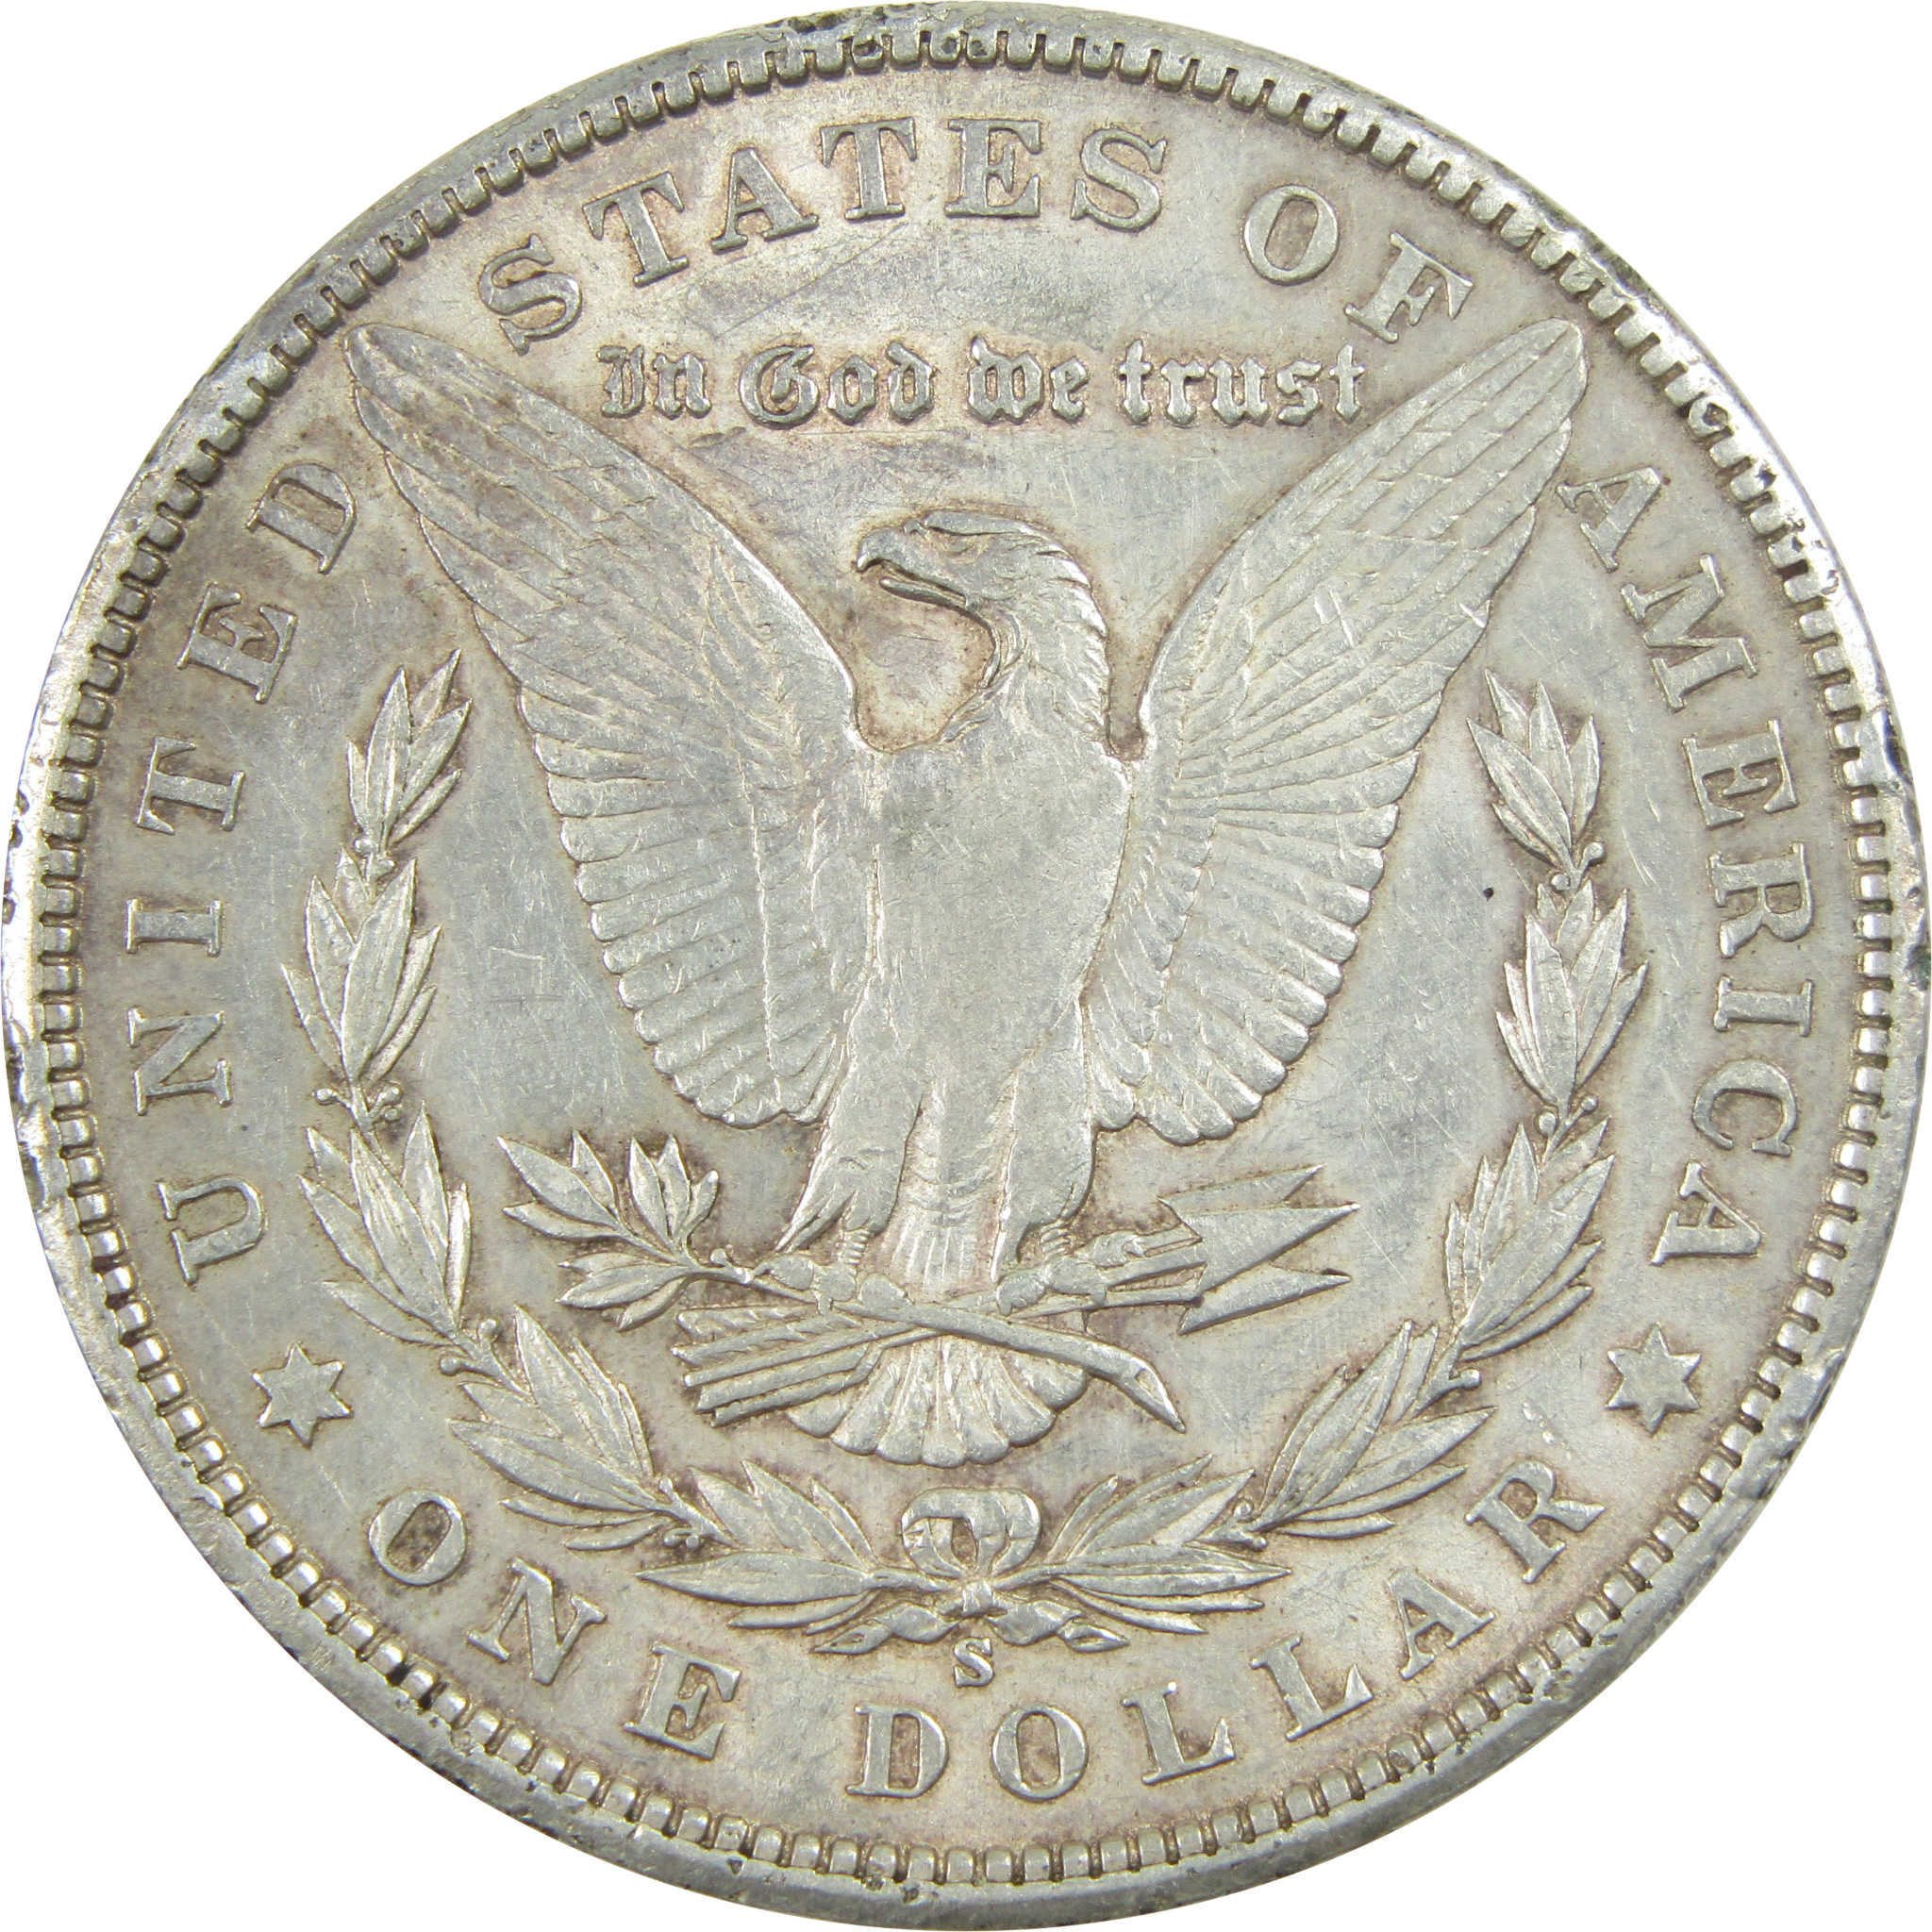 1901 S Morgan Dollar XF EF Extremely Fine Silver $1 Coin SKU:I13367 - Morgan coin - Morgan silver dollar - Morgan silver dollar for sale - Profile Coins &amp; Collectibles